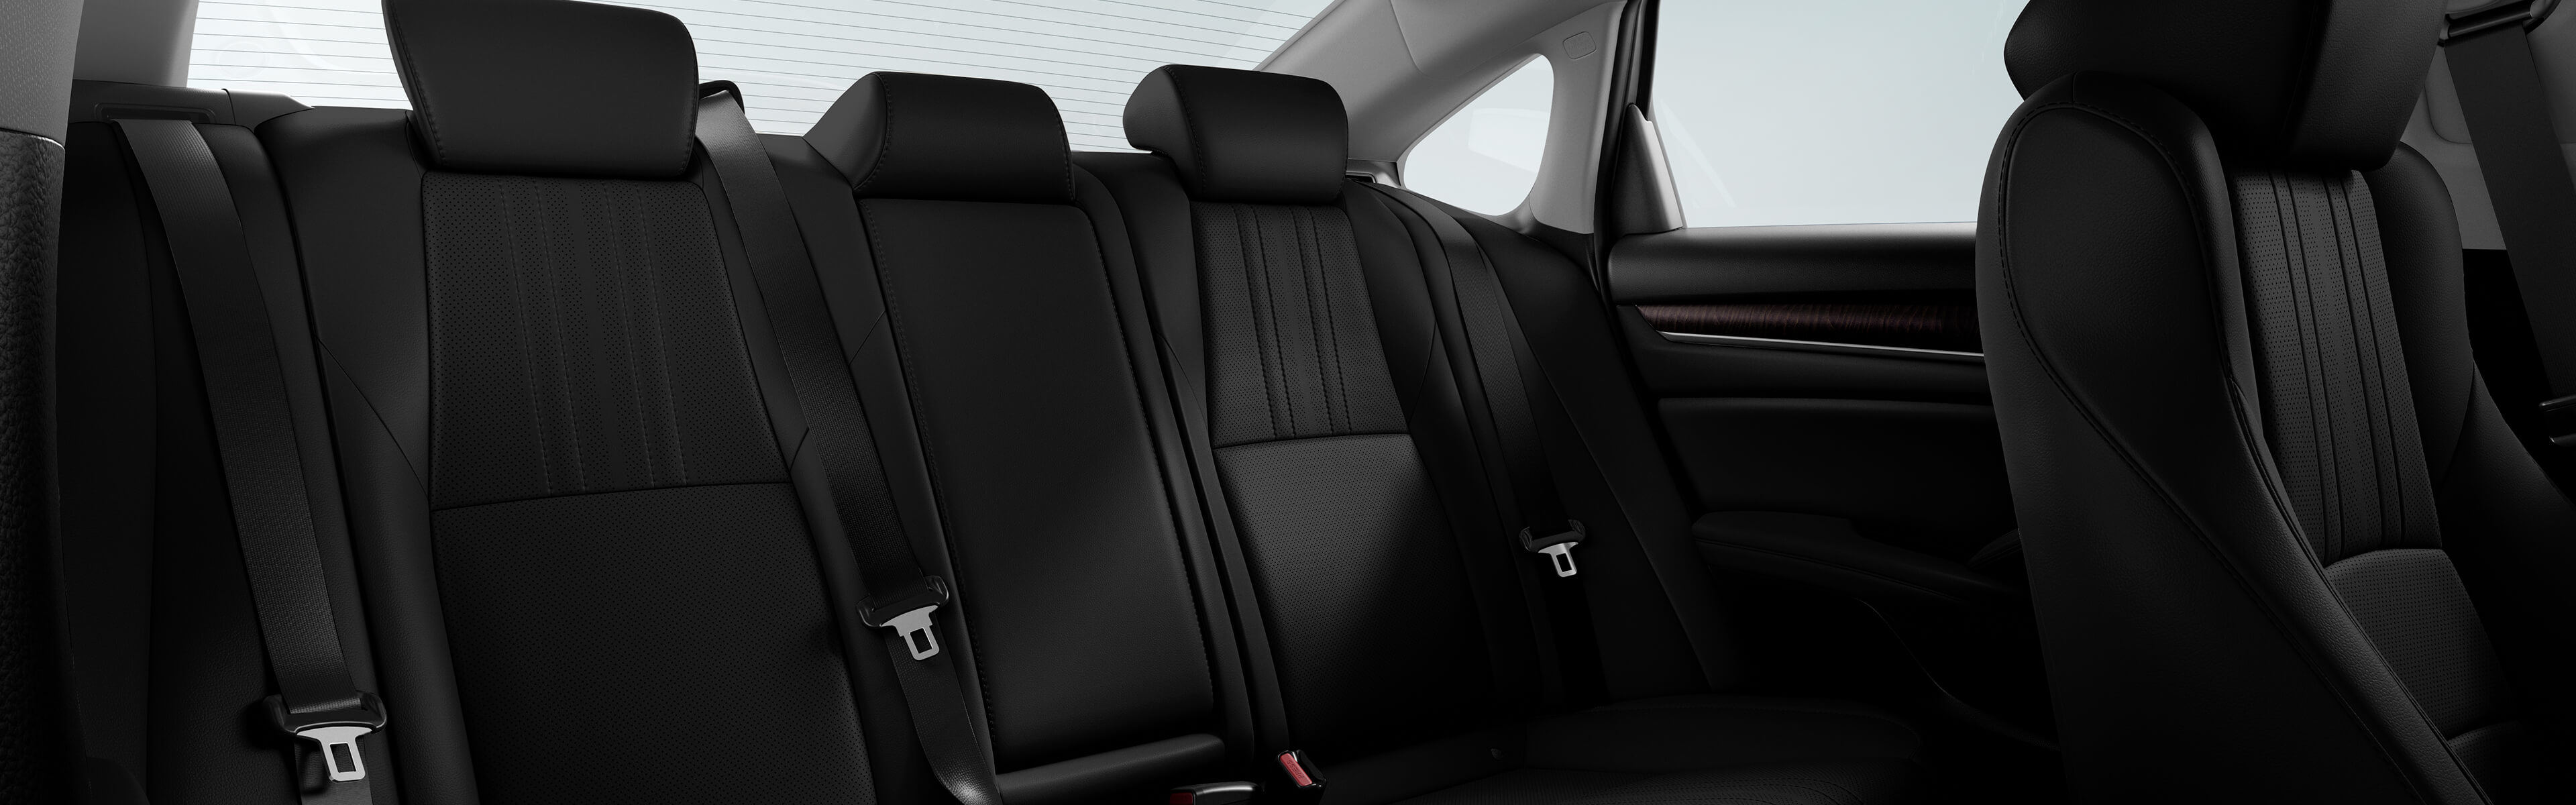 Image of 2021 Accord Hybrid leather seats 